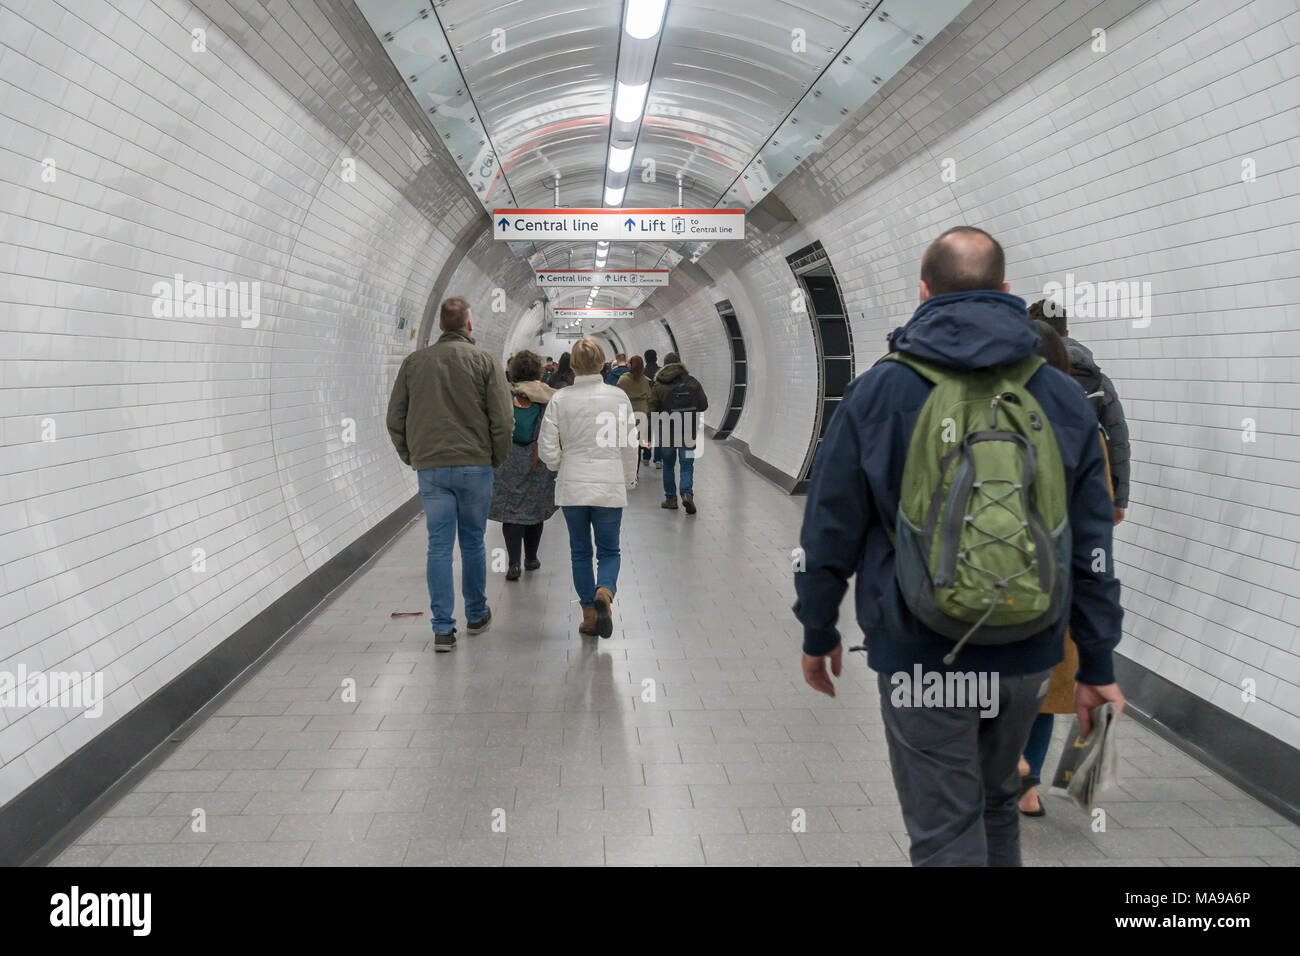 Passengers walk down a connecting tunnel towards the Central Line at a London Underground station. Stock Photo